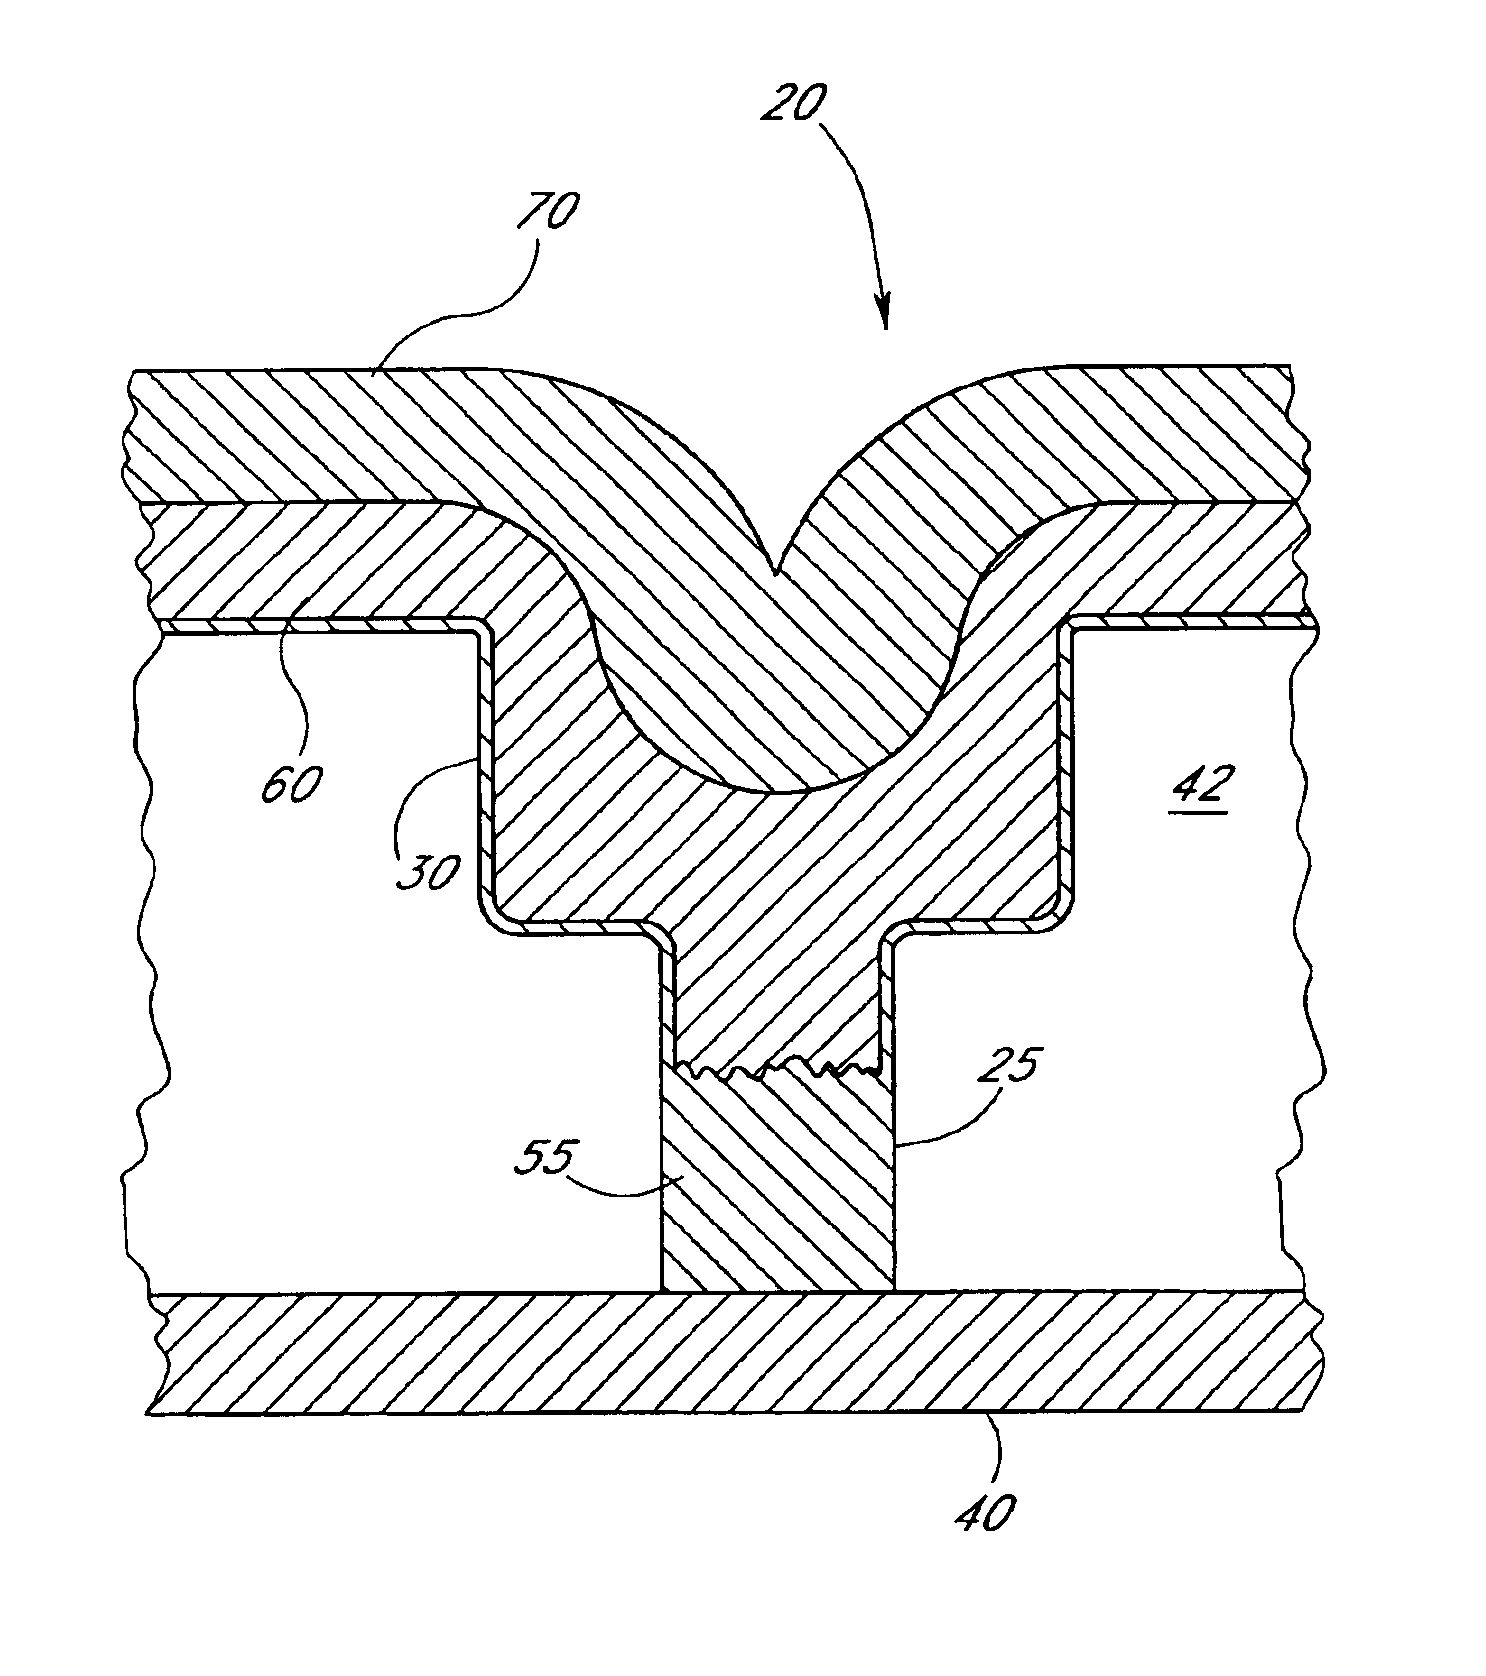 Method of forming a dual damascene interconnect by selective metal deposition